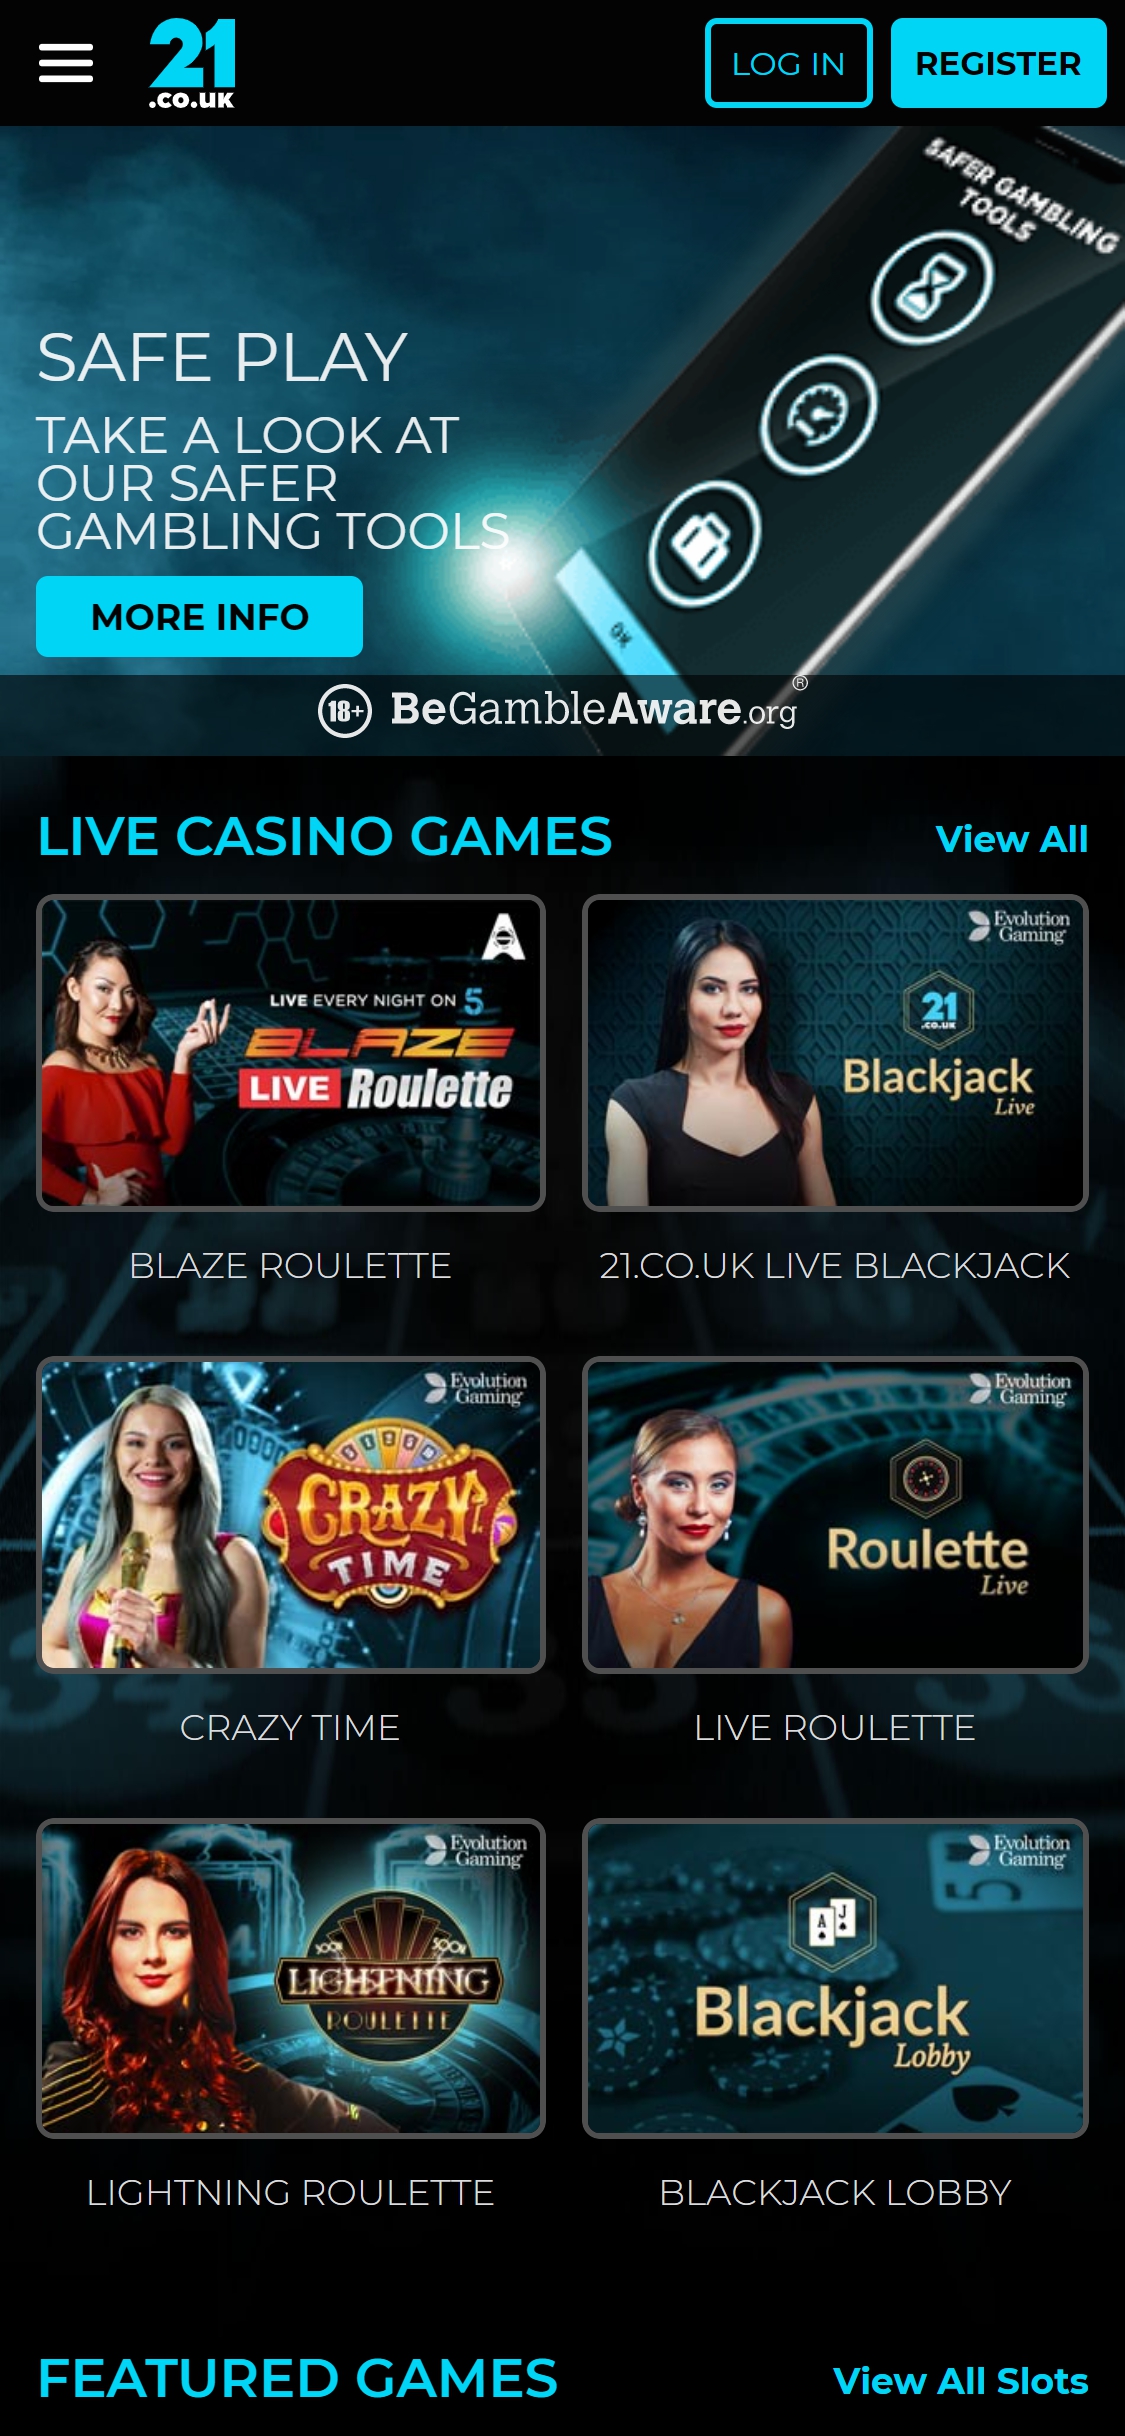 21.co.uk Casino Mobile Review